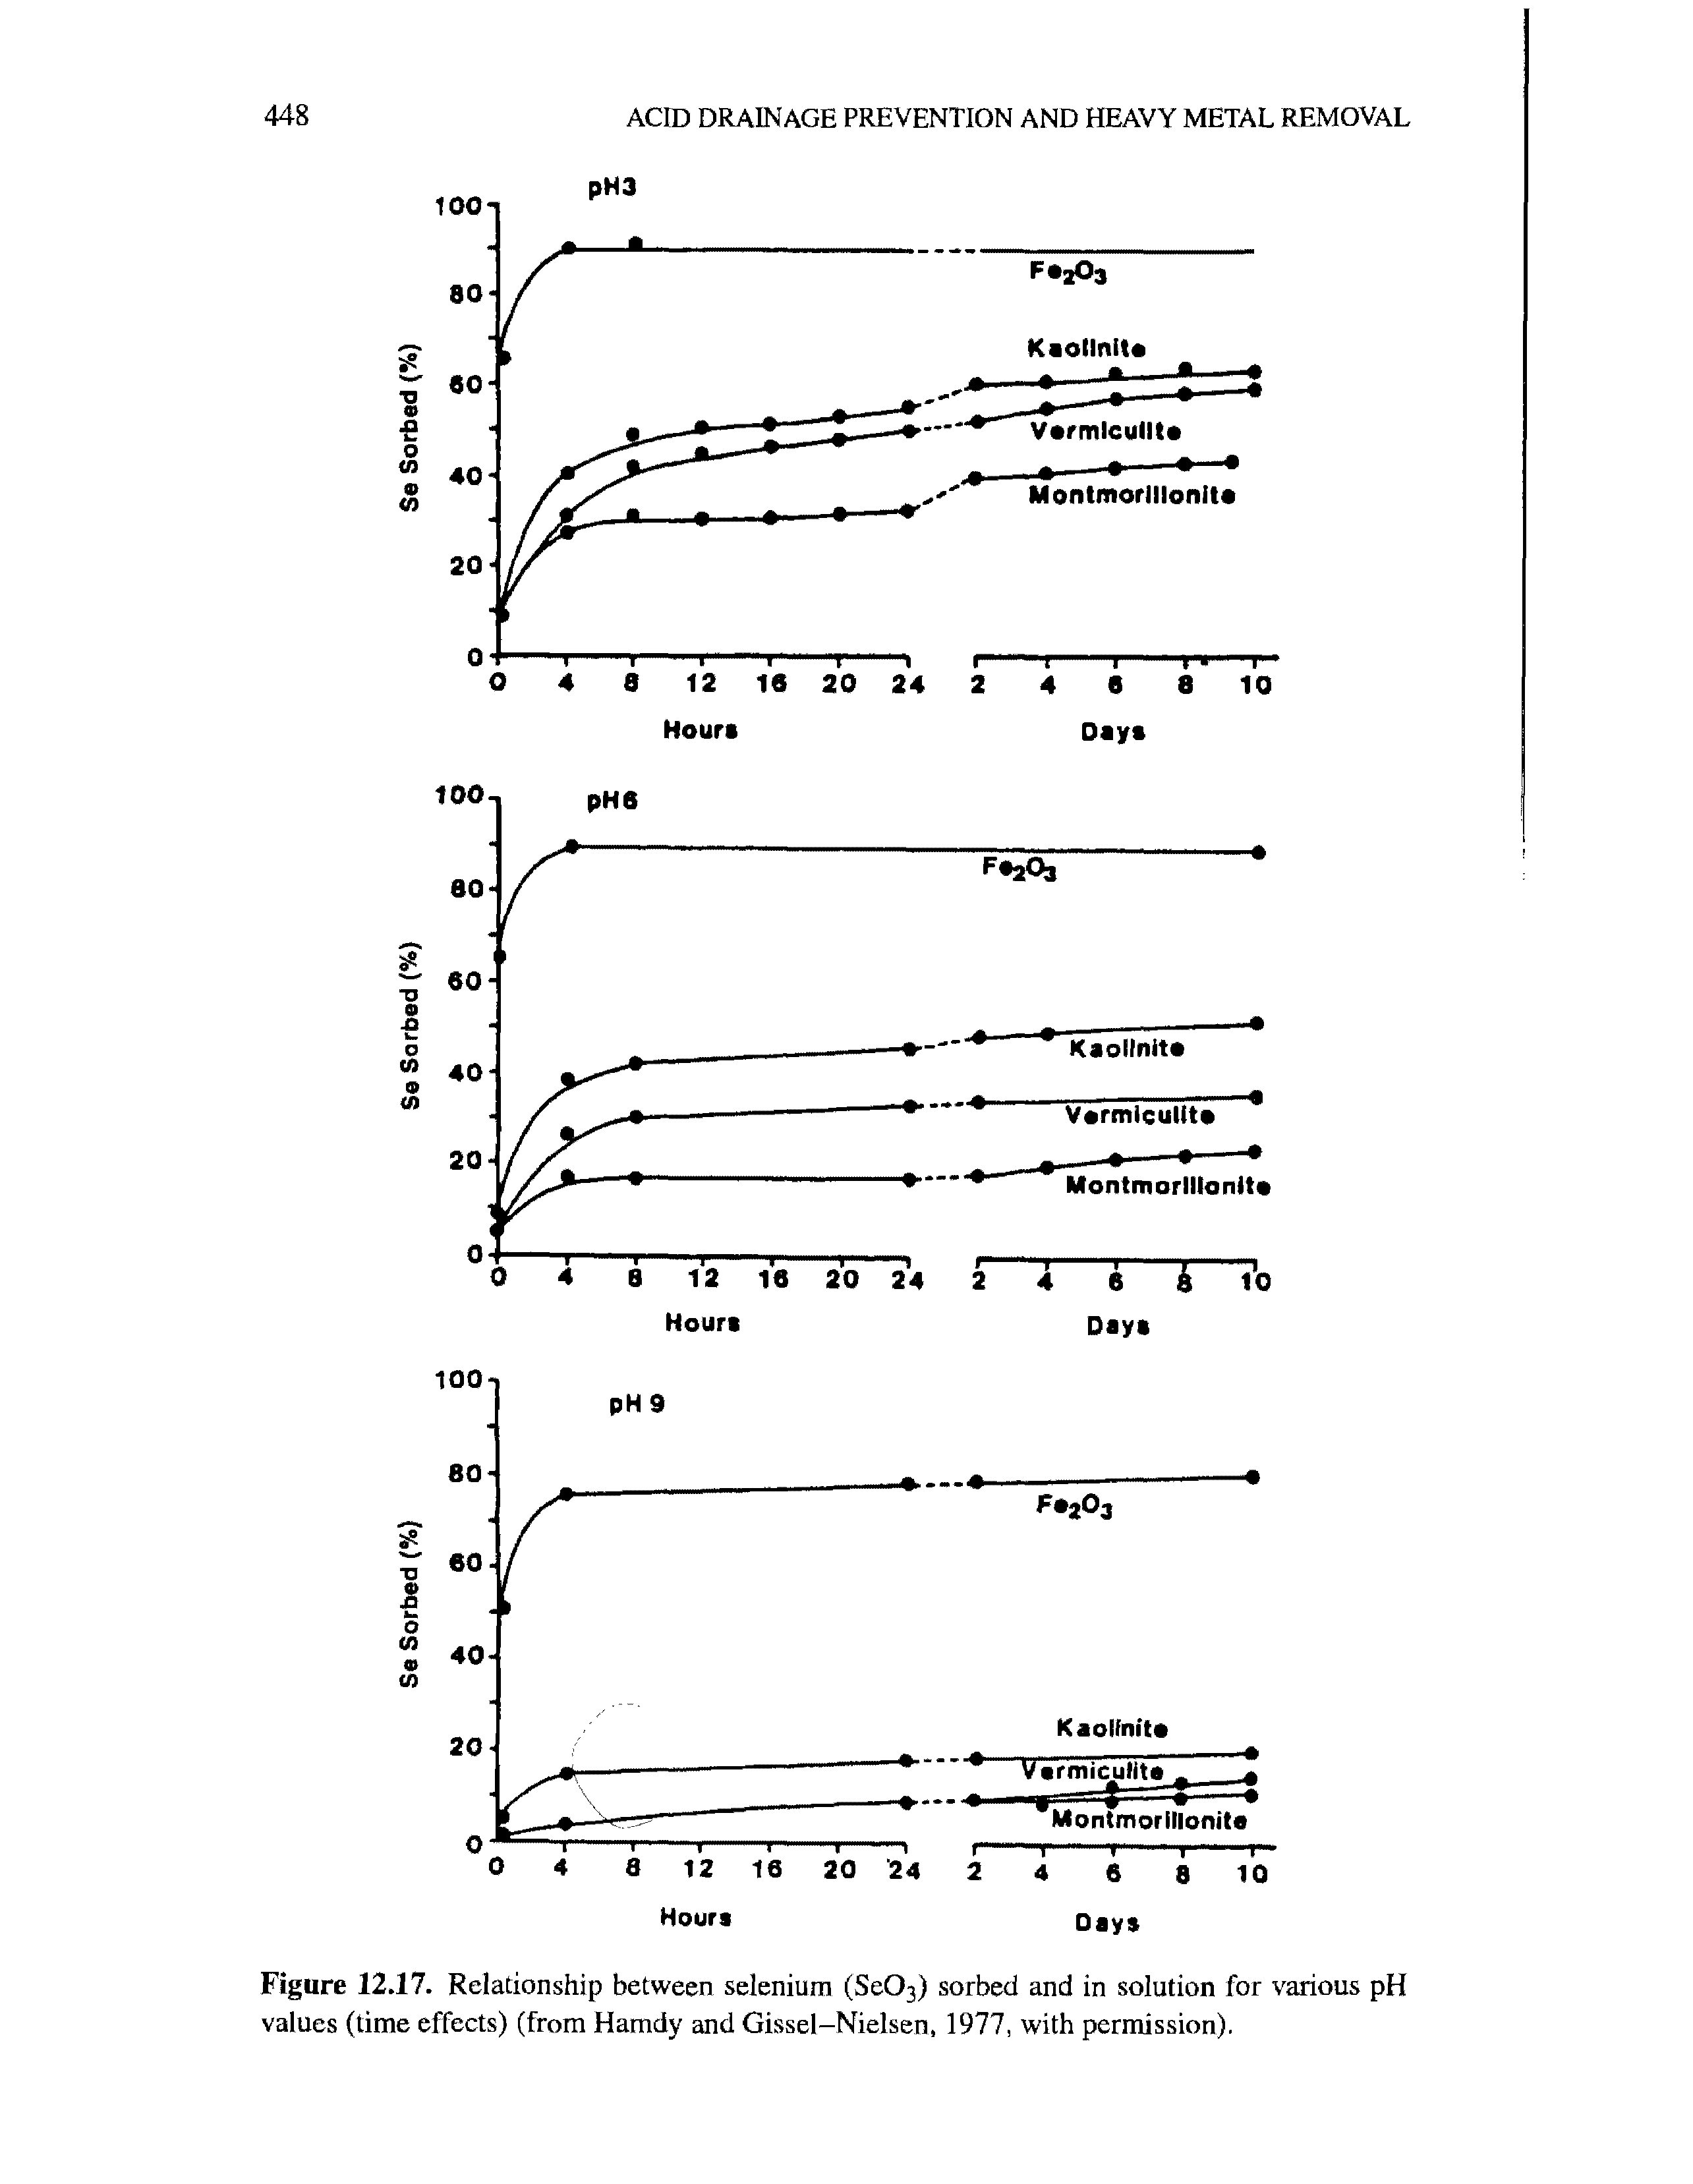 Figure 12.17. Relationship between selenium (Se03) sorbed and in solution for various pH values (time effects) (from Hamdy and Gissel-Nielsen, 1977, with permission).